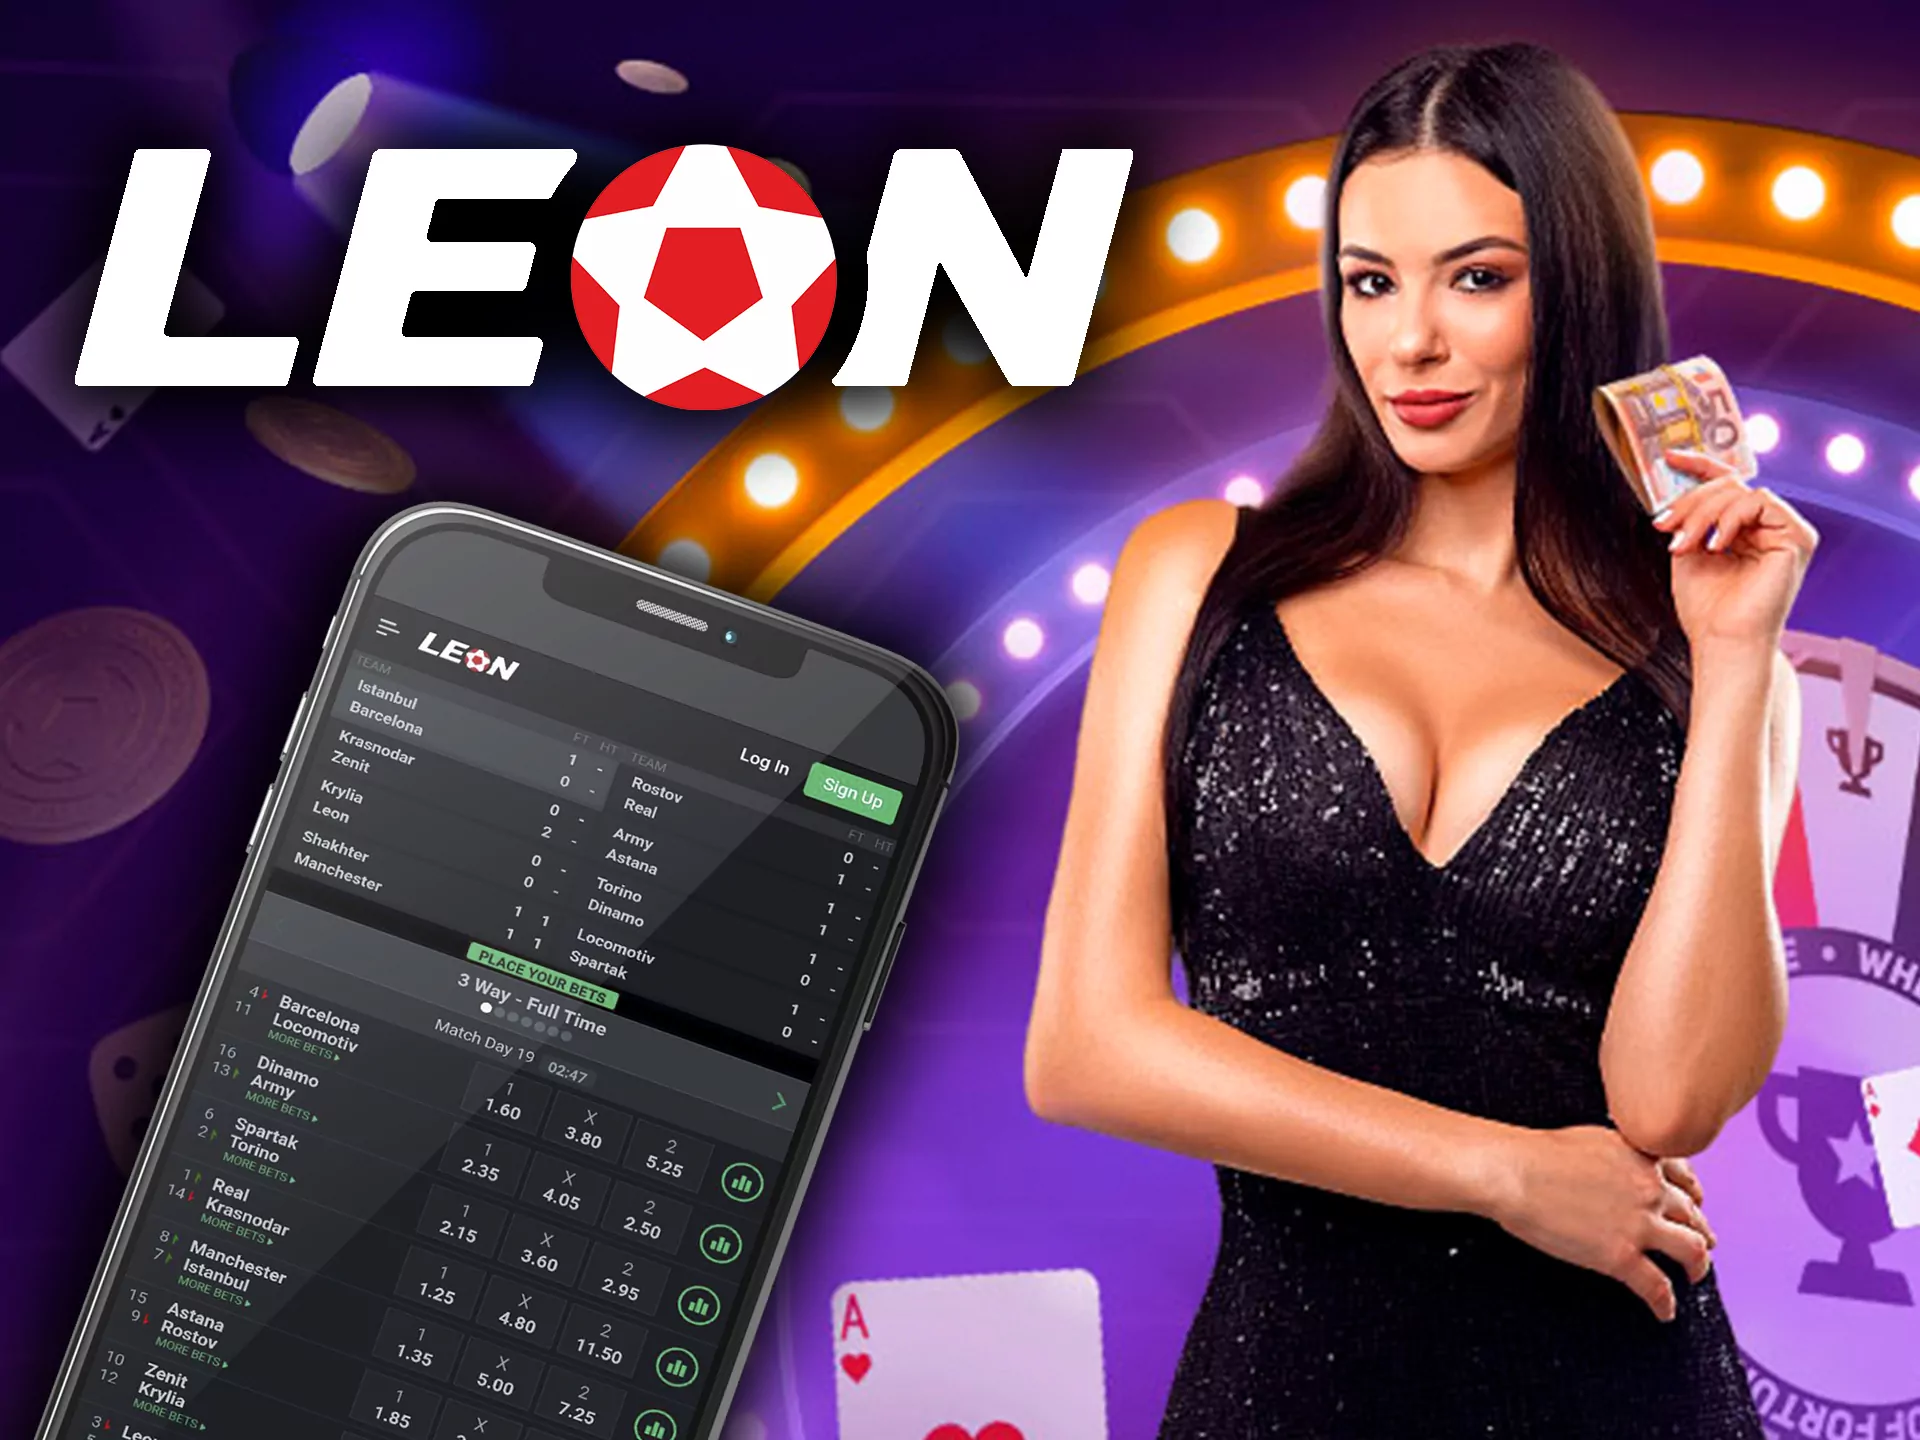 You can see that betting in Leon is pretty convenient and profitable.